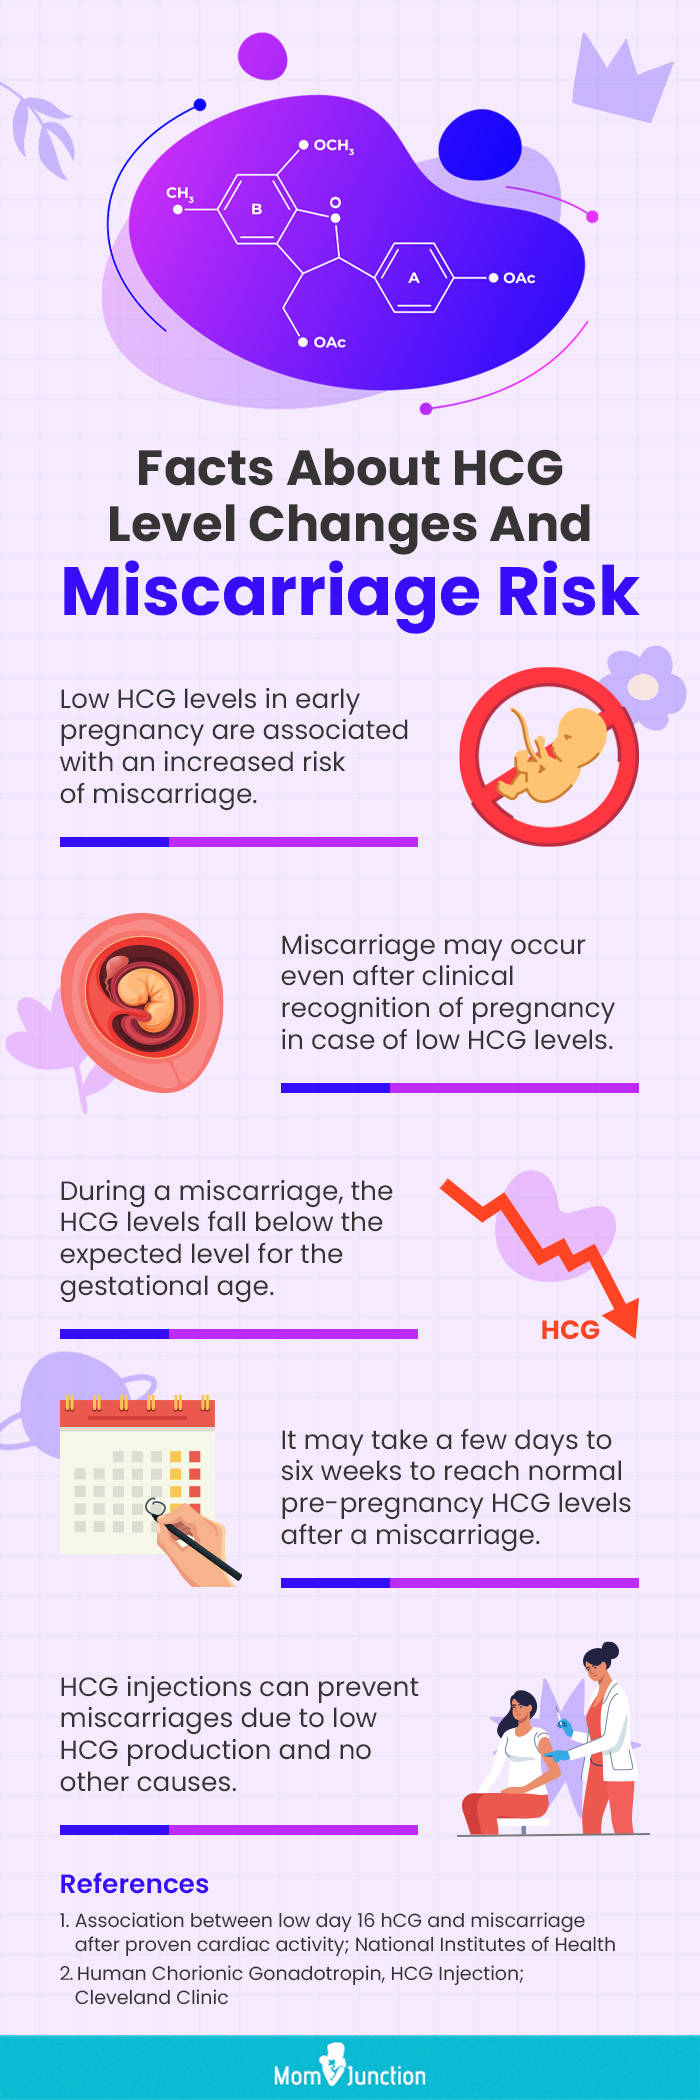 hcg level changes and miscarriage risk [infographic]